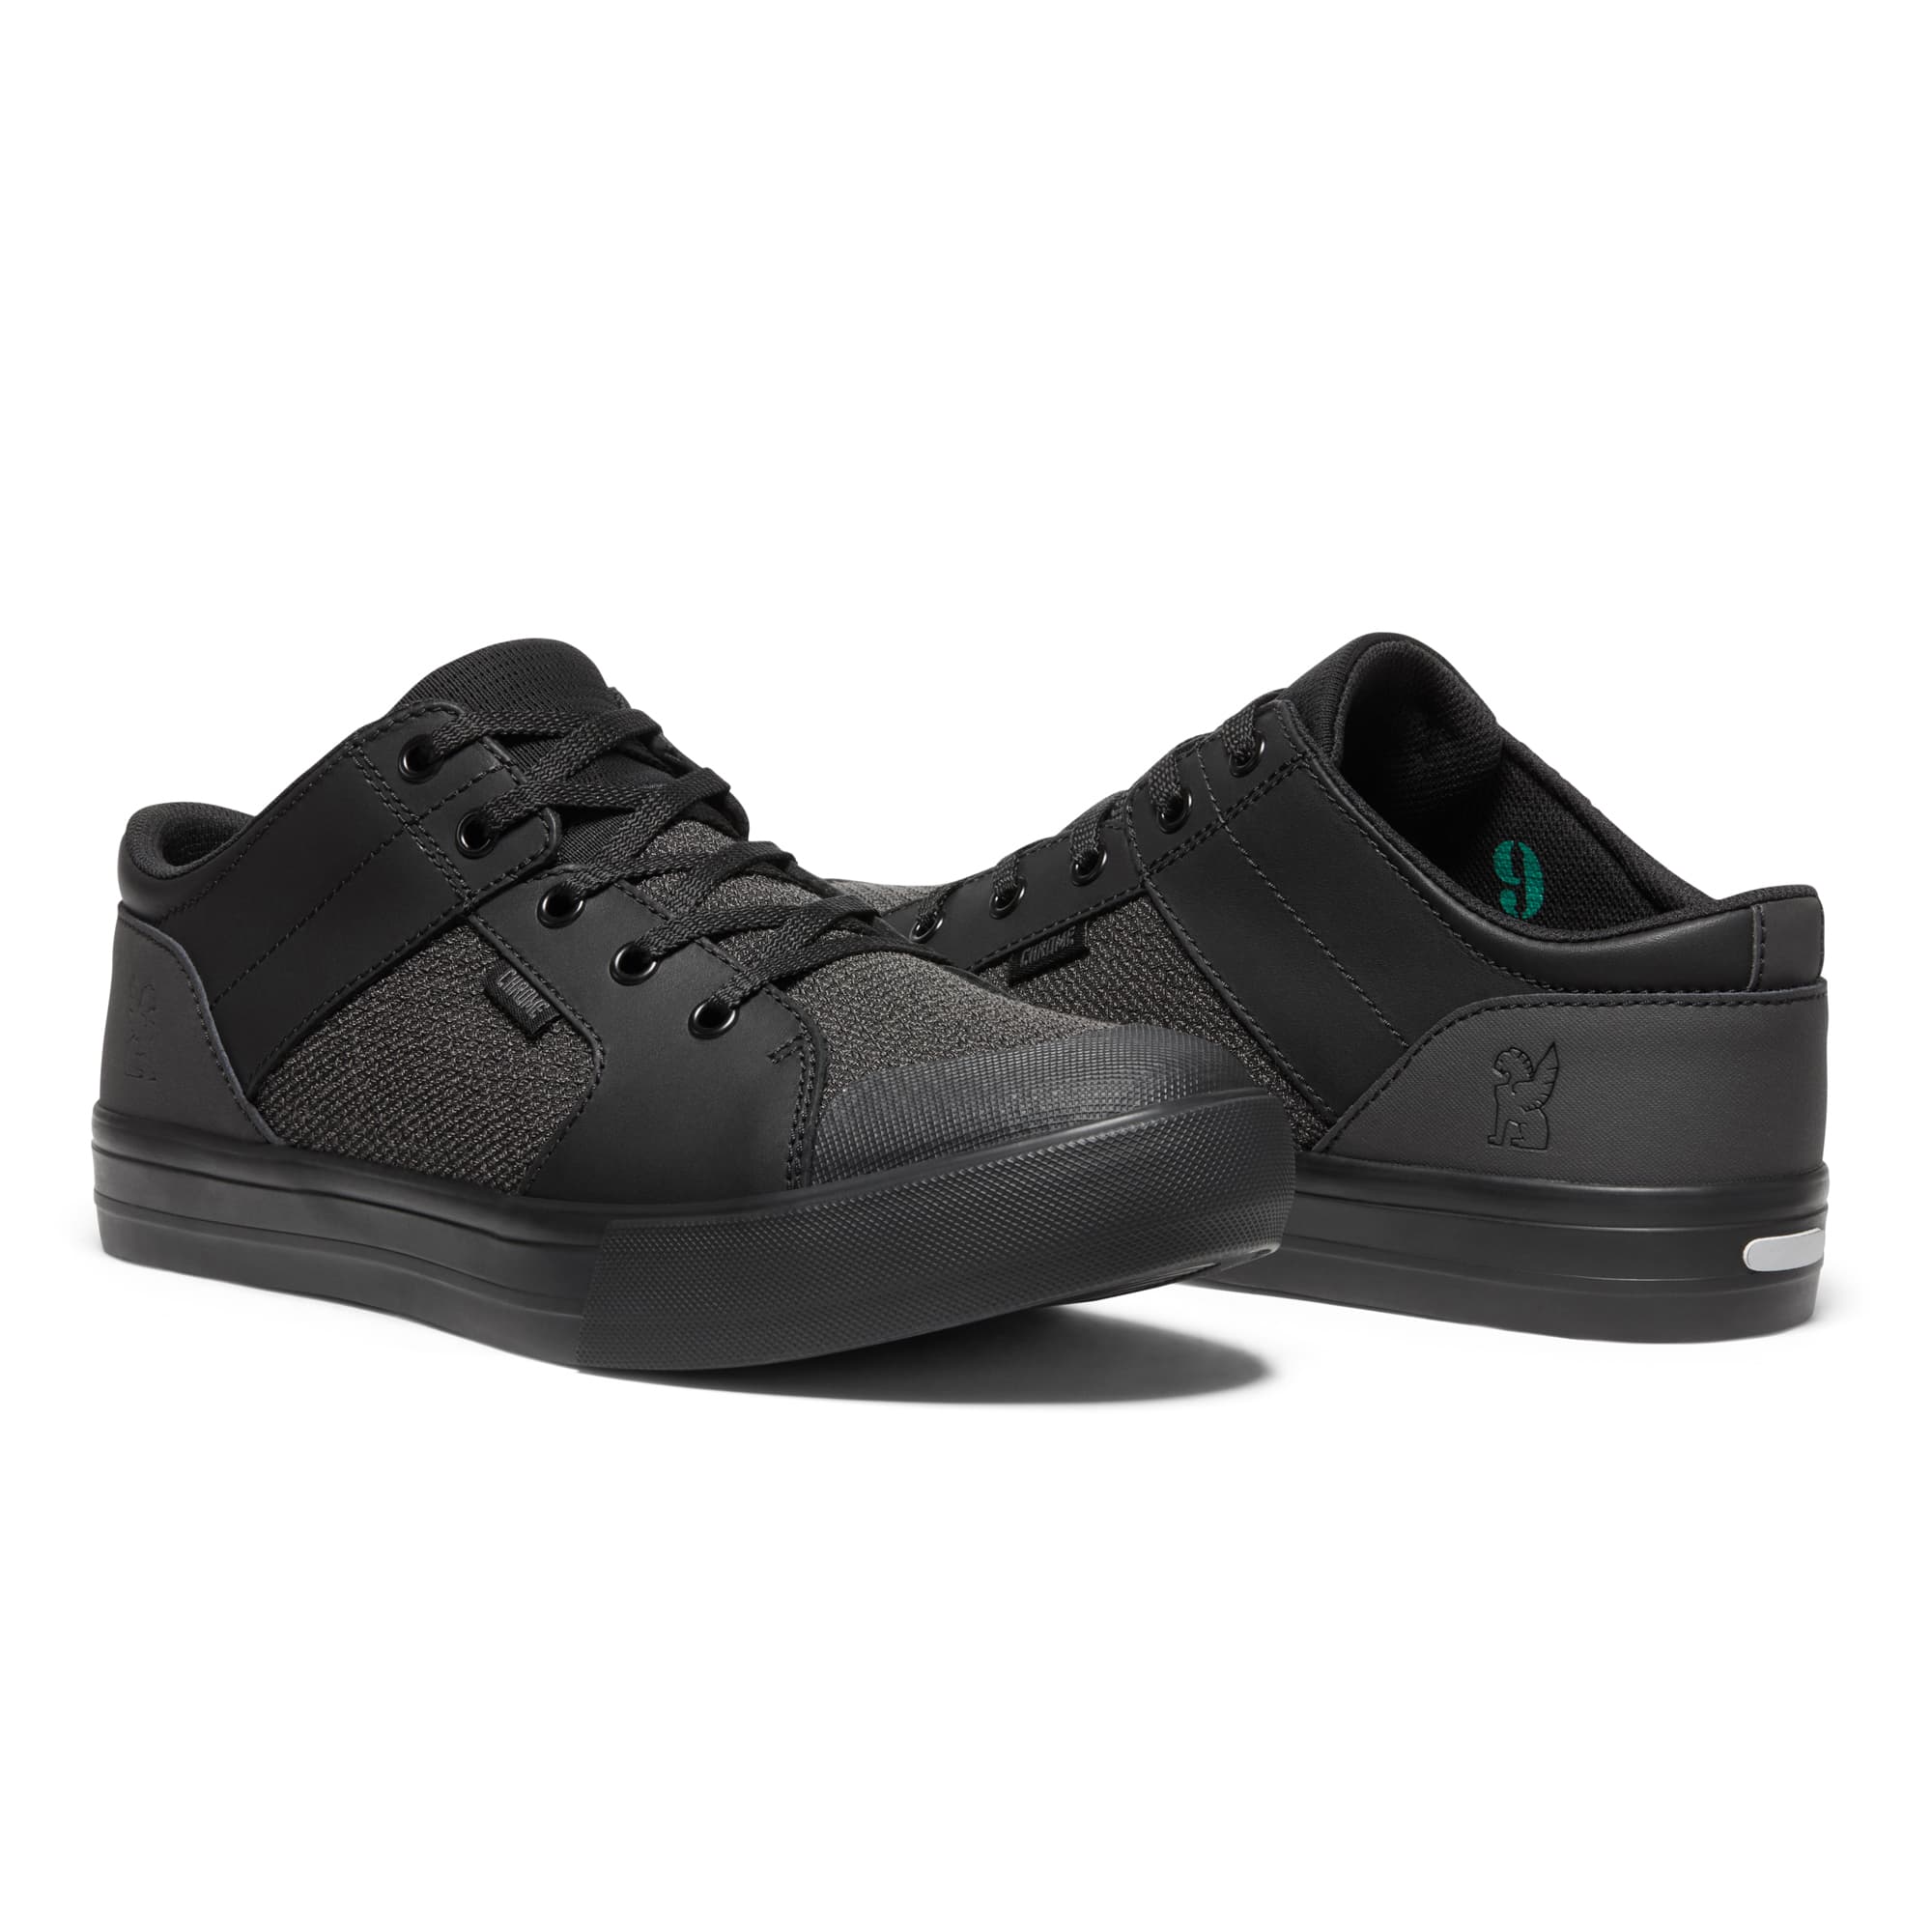 Southside SPD sneaker low profile in black with black left and right shoe